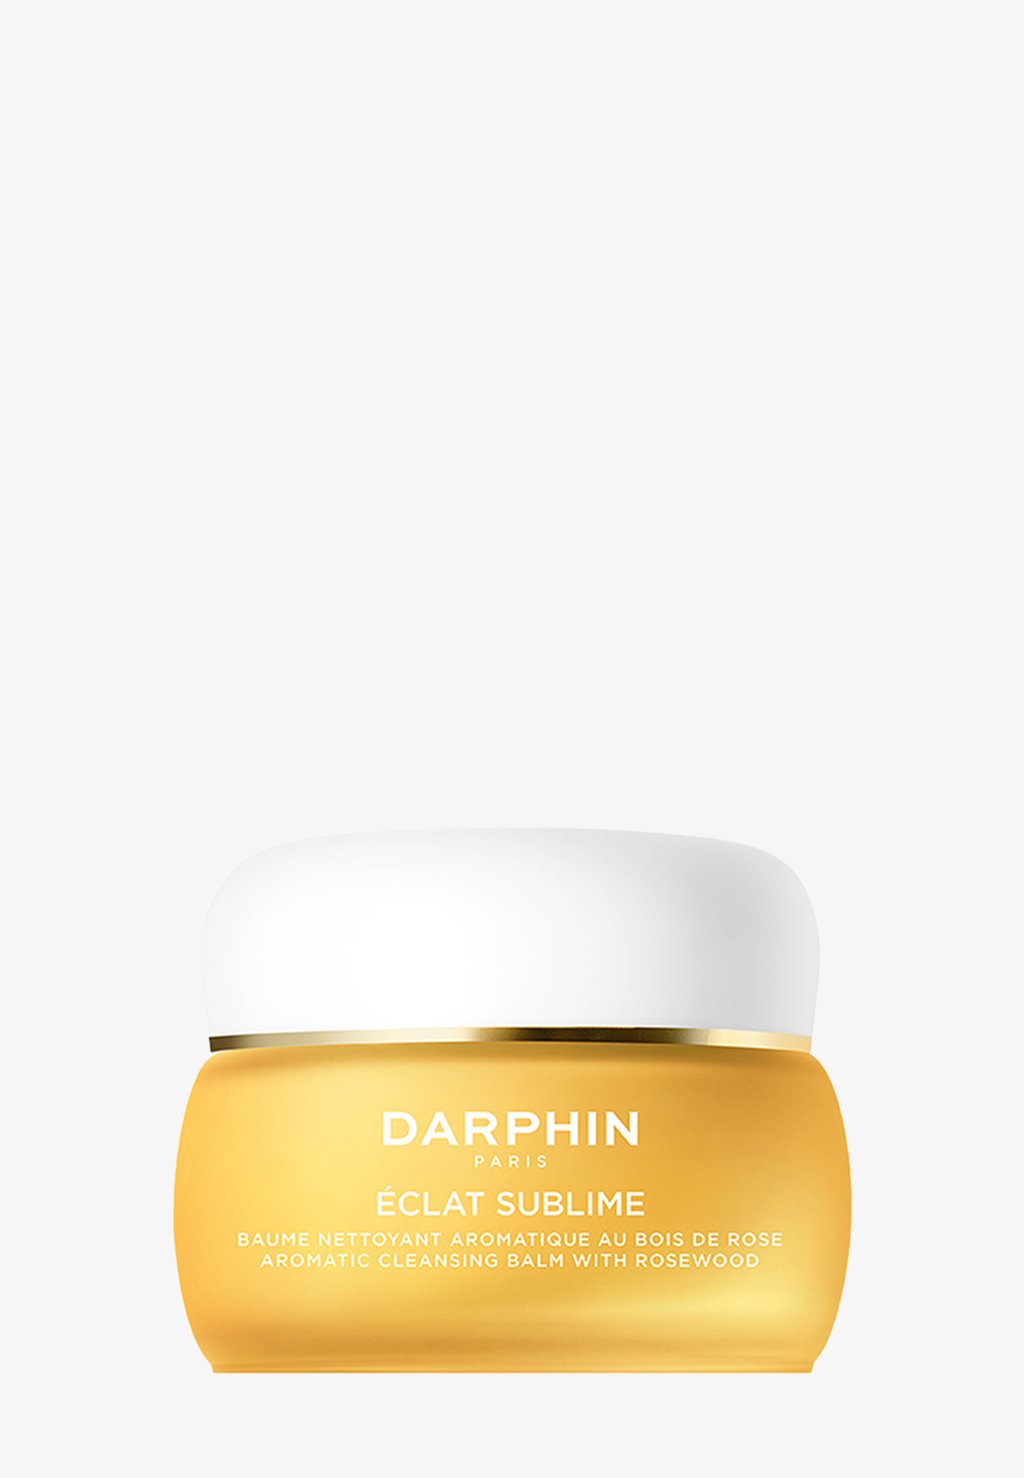 darphin eclat sublime aromatic cleansing balm with rosewood Очищающее средство Éclat Sublime Aromatic Cleansing Balm Darphin